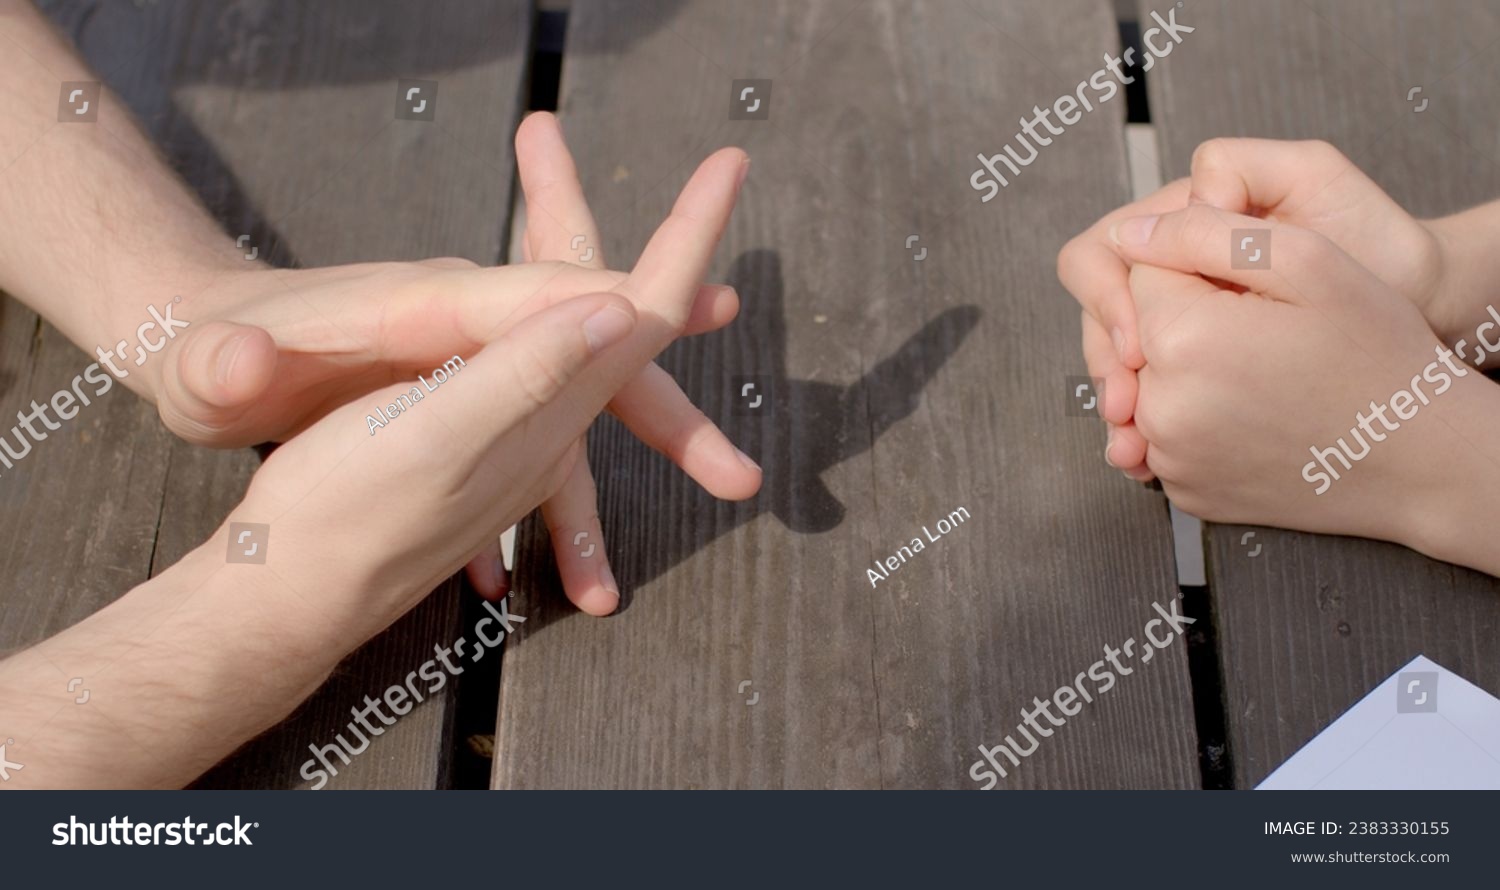 Close-up hands during discourse time. Gesture nonverbal form of communication during conversation that convey meanings, emotions, ideas. Gestures enhance spoken language, young people body details.  #2383330155